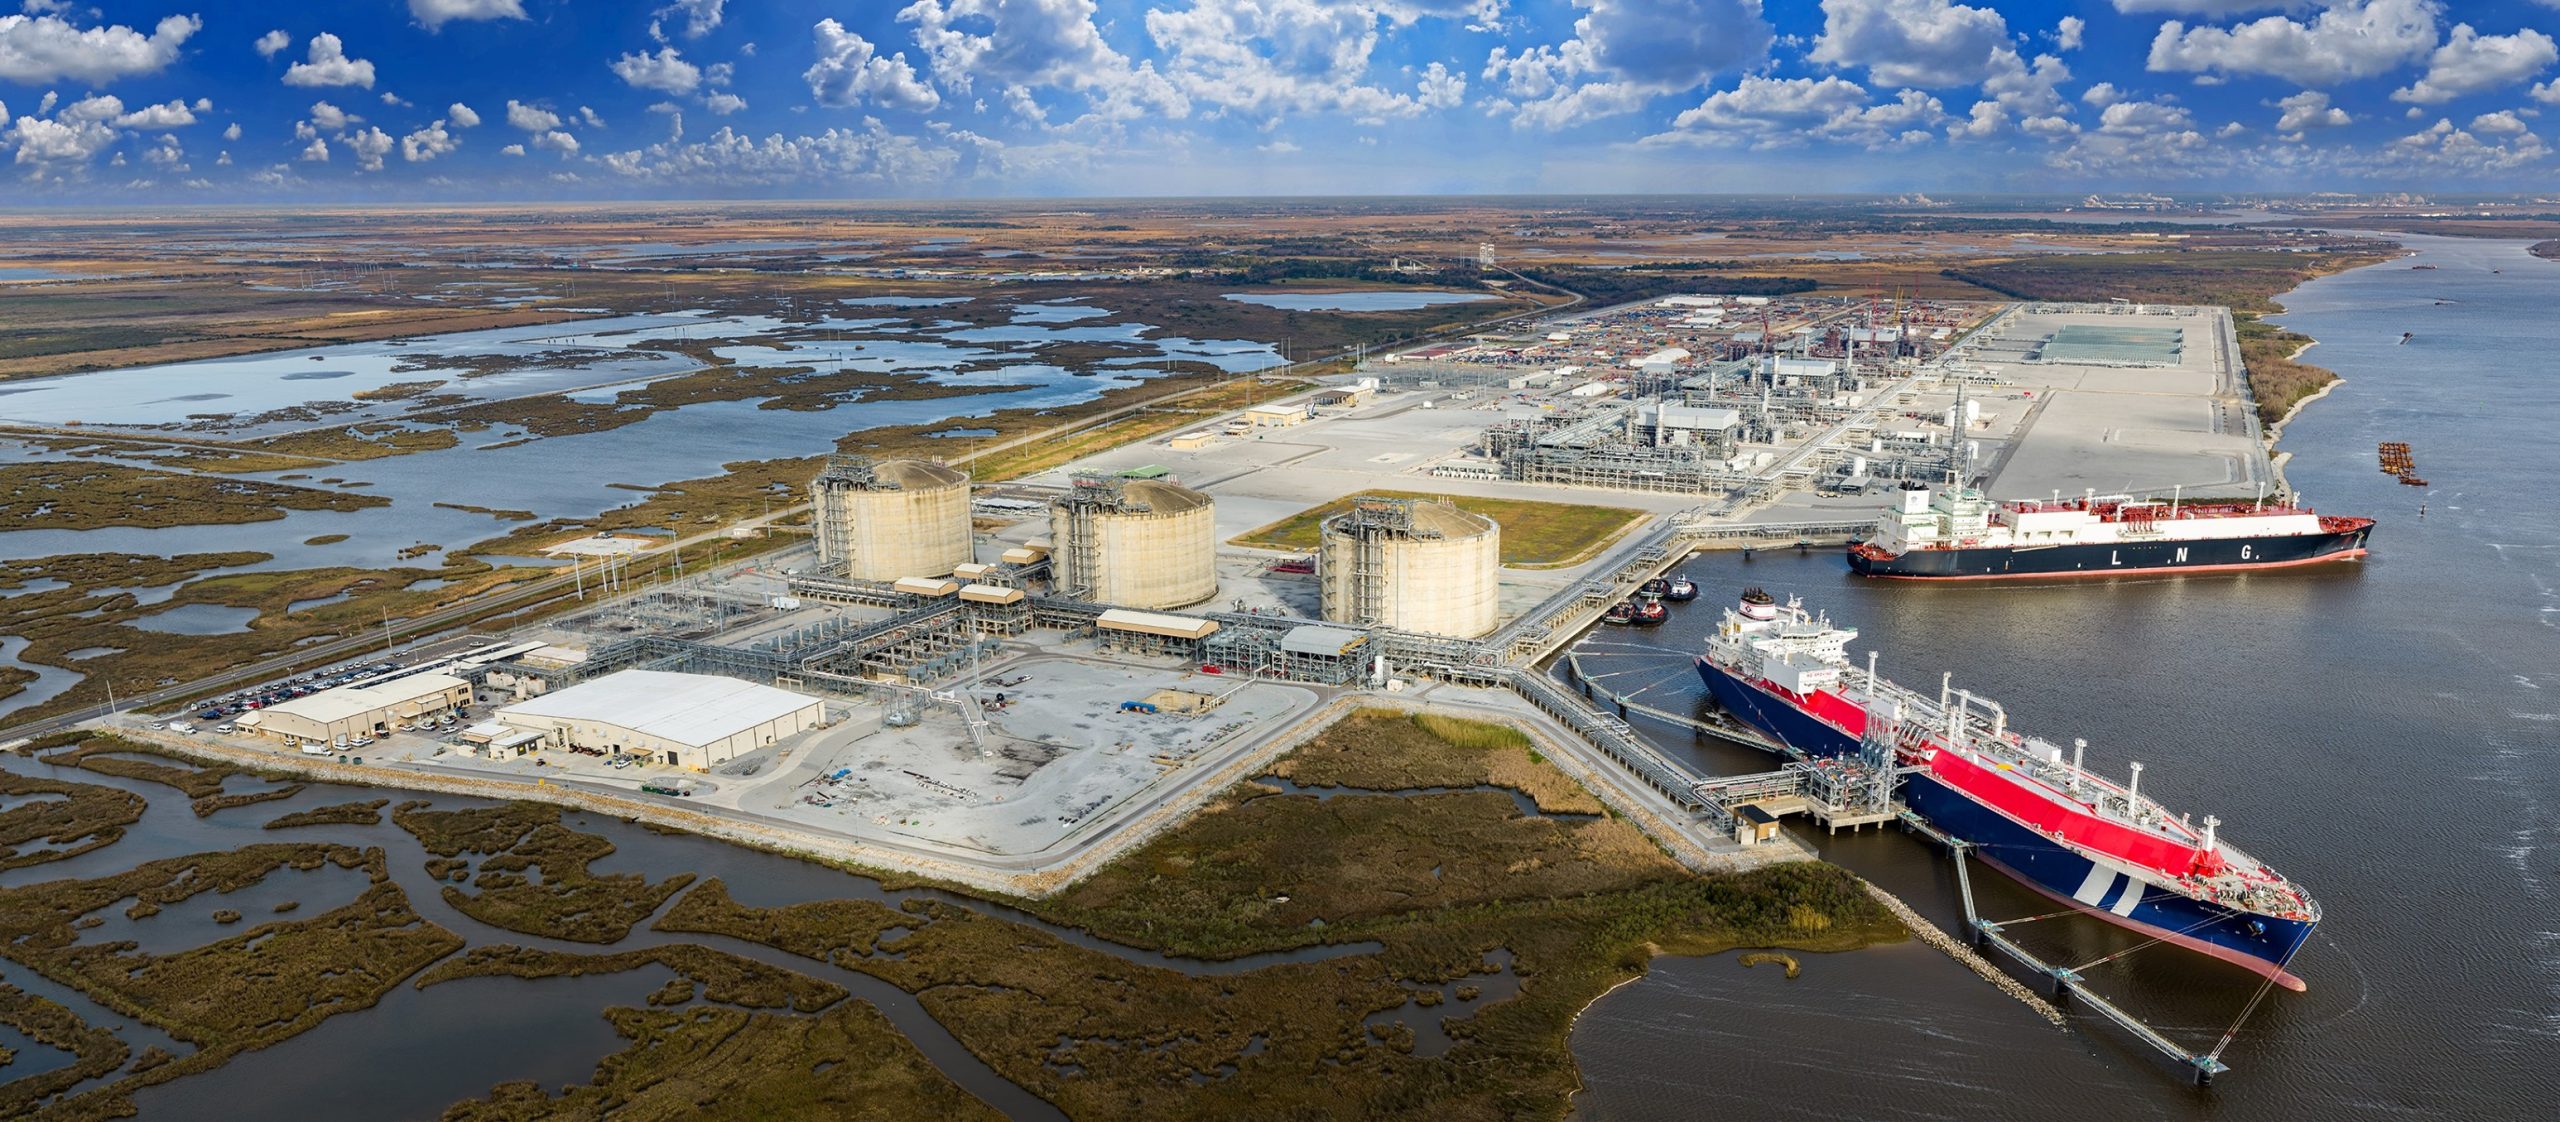 US weekly LNG exports up to 25 shipments